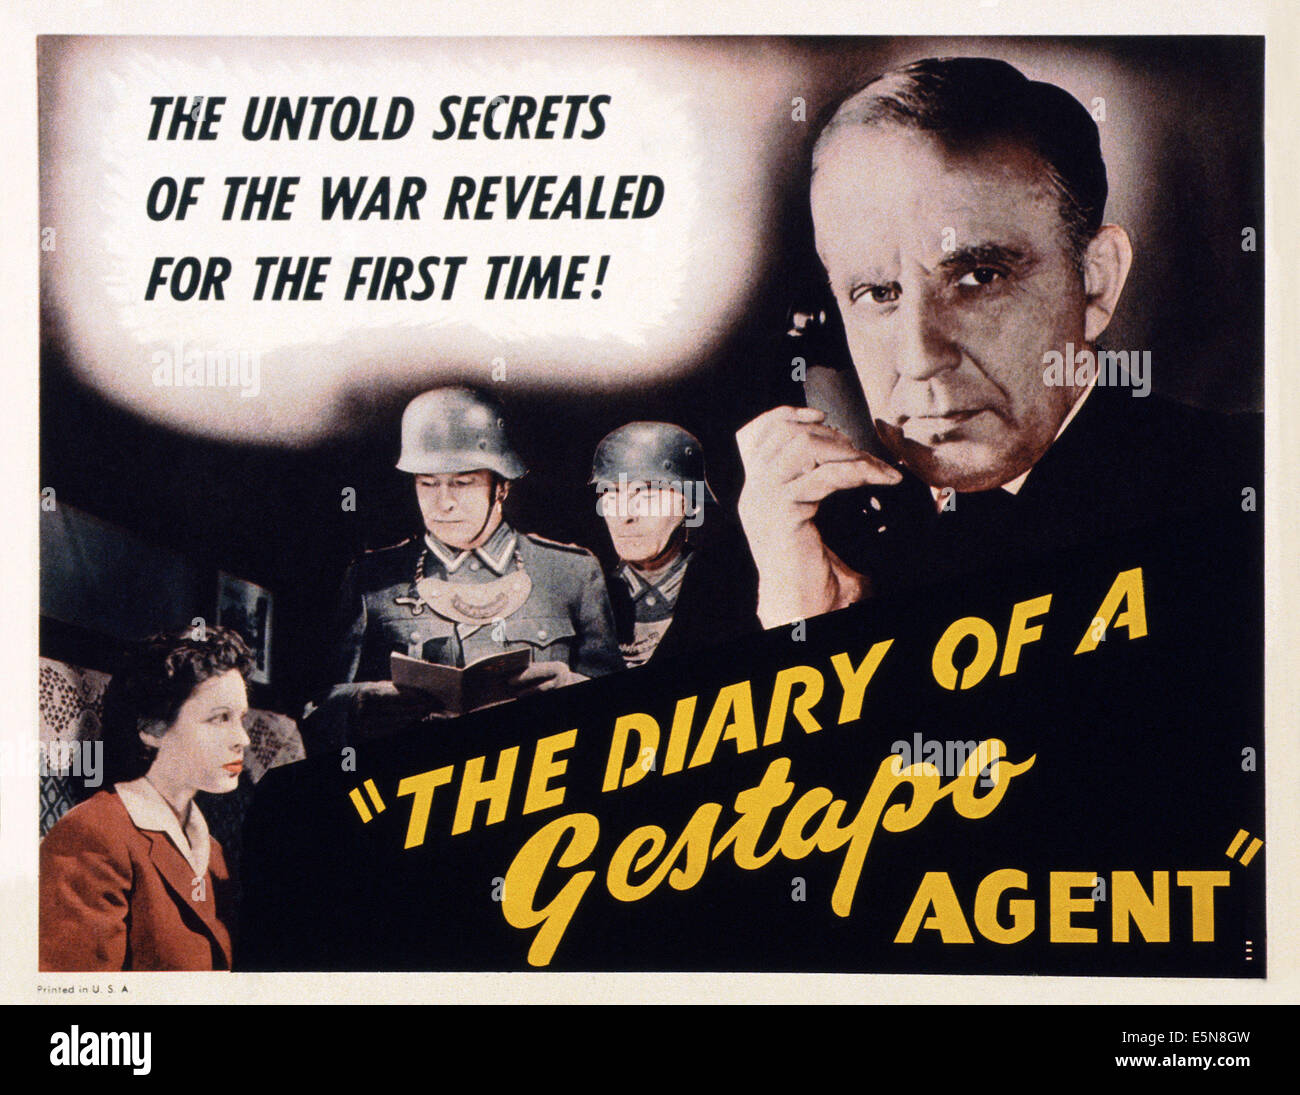 THE DIARY OF A GESTAPO AGENT, 1958 Stock Photo